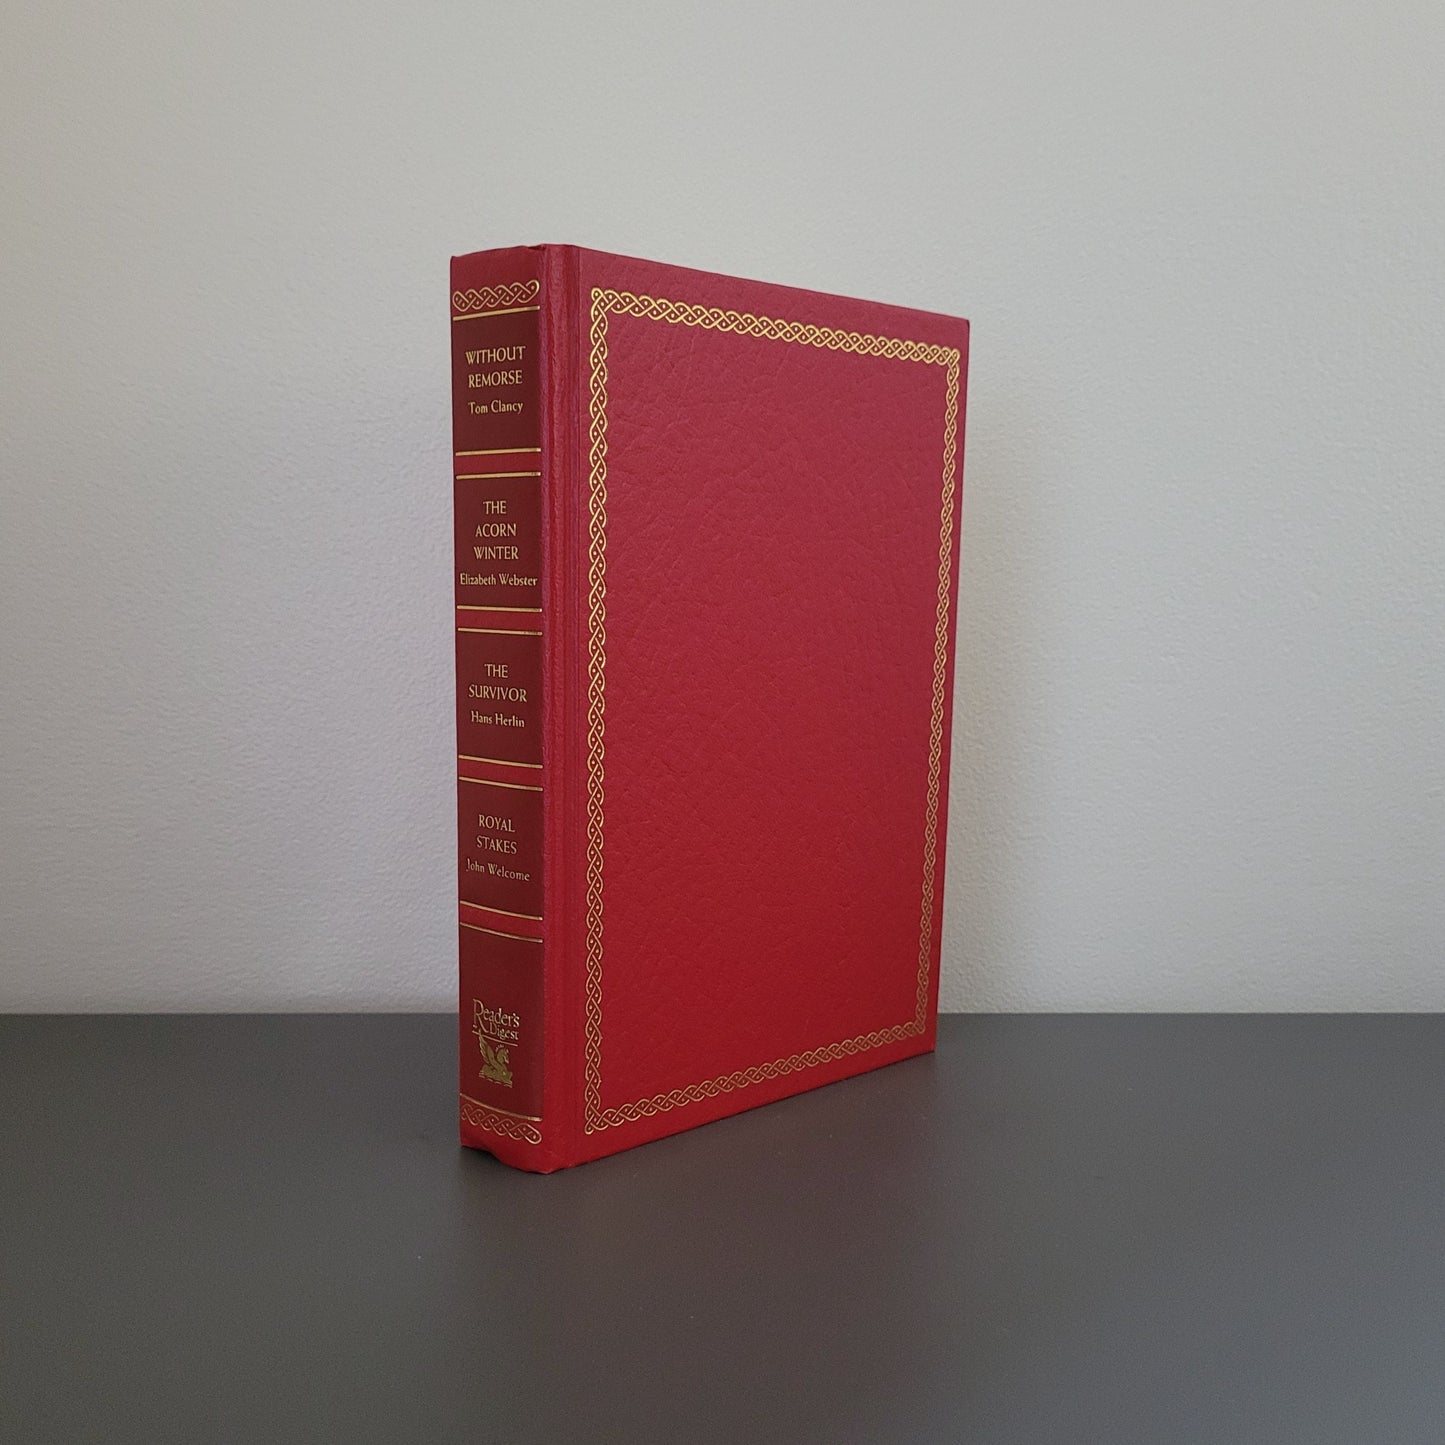 A picture of the front of the book fold - a red hardback book with a gold border.